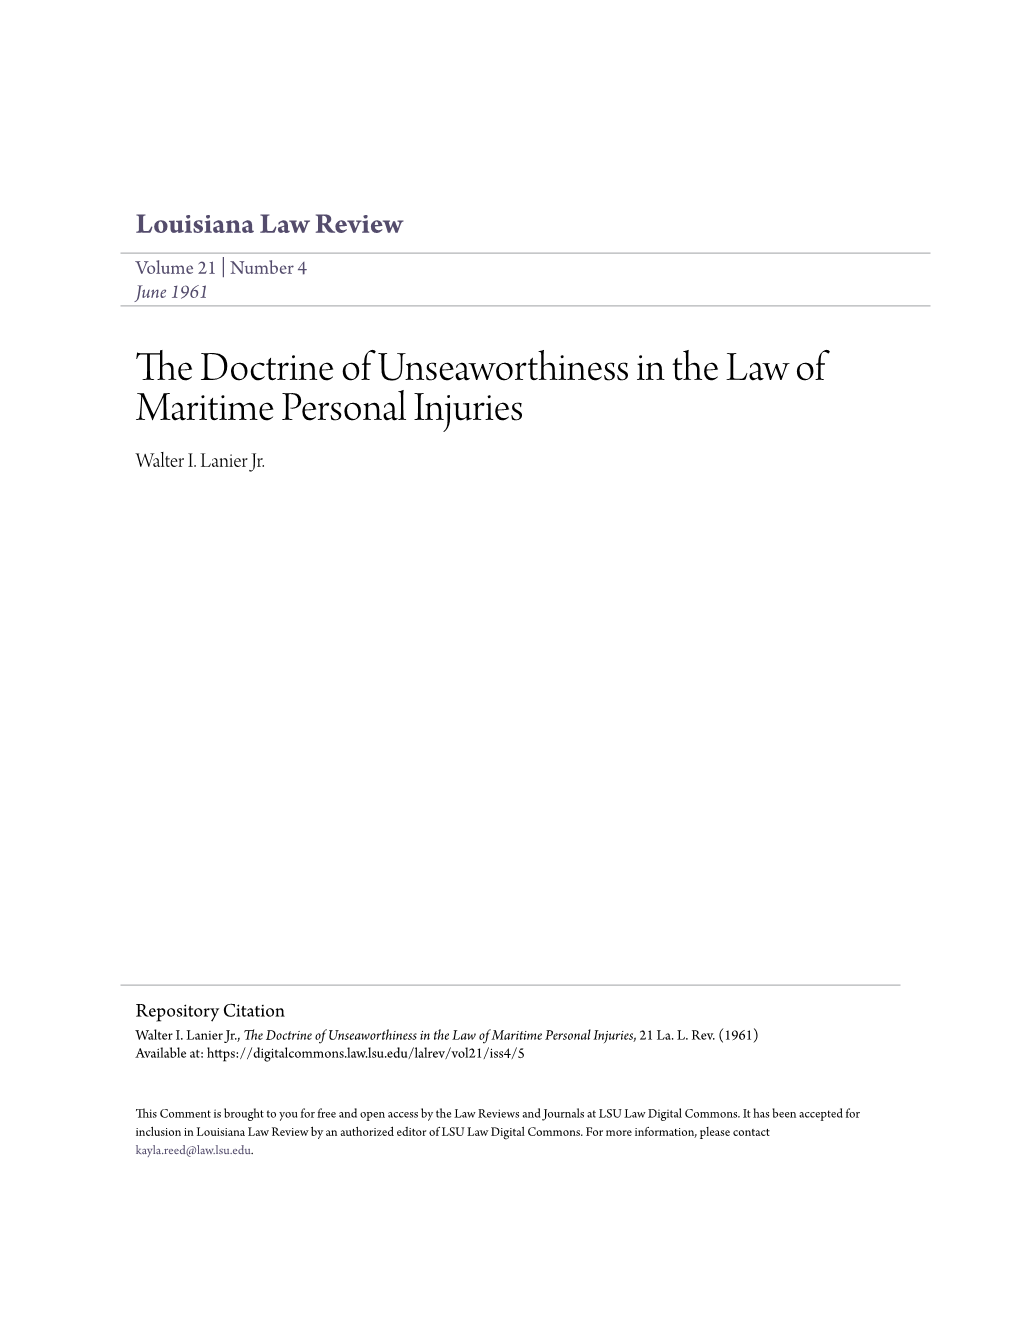 The Doctrine of Unseaworthiness in the Law of Maritime Personal Injuries, 21 La